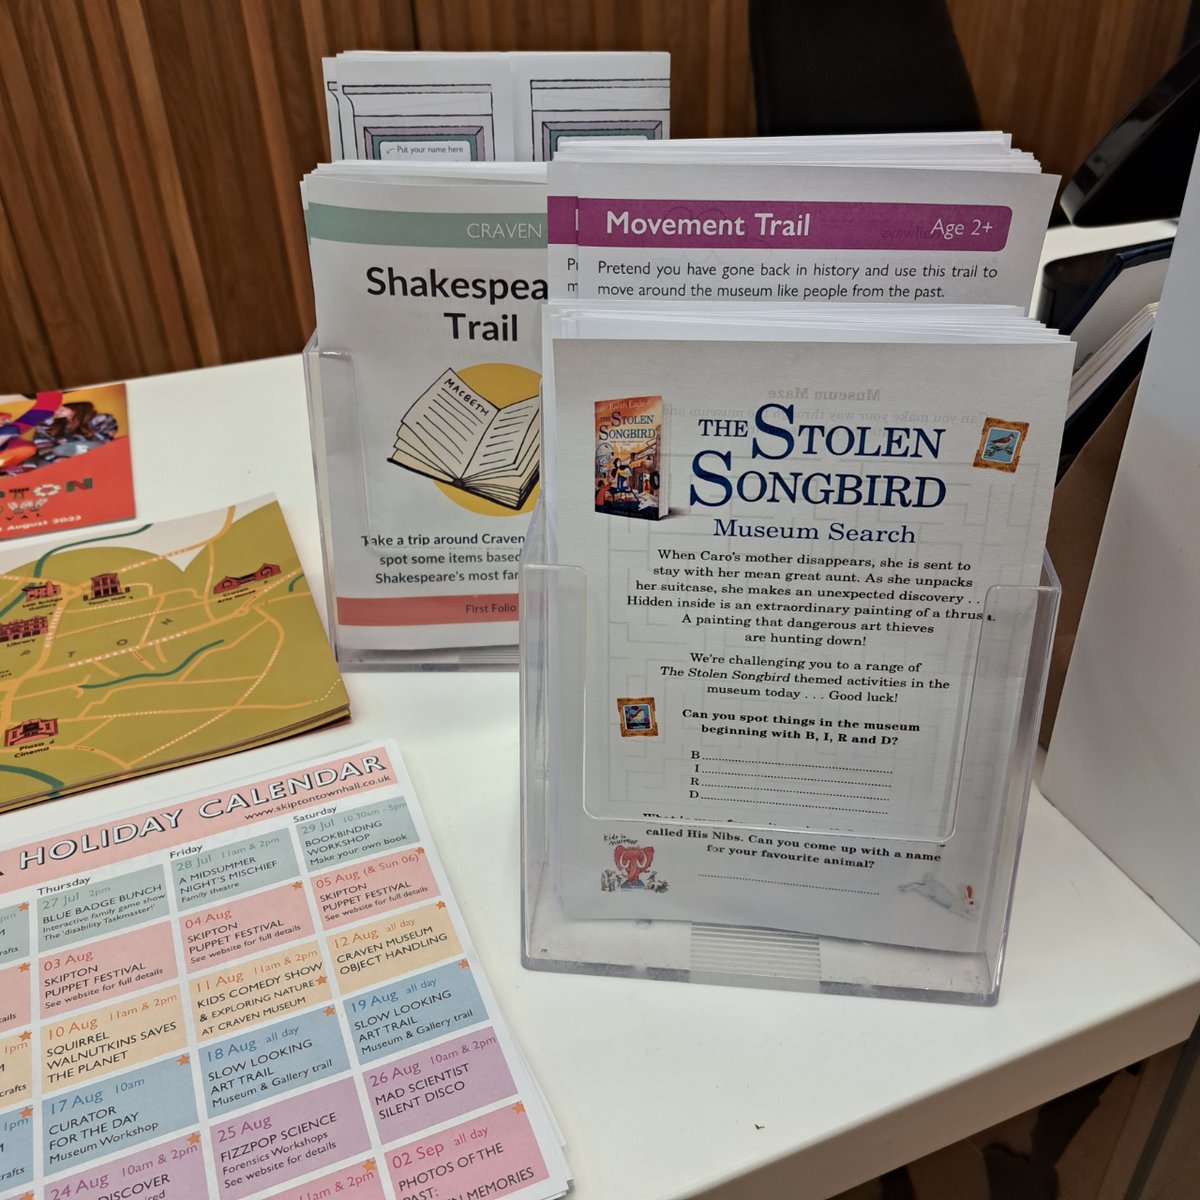 To celebrate the launch of the new children's book by @EagleJudith and @kim_geyer, we're holding a #TheStolenSongbird Museum Search at Craven Museum this August!

Grab an activity sheet when you visit to join in, you can also buy a copy of the book from our shop.

@kidsinmuseums